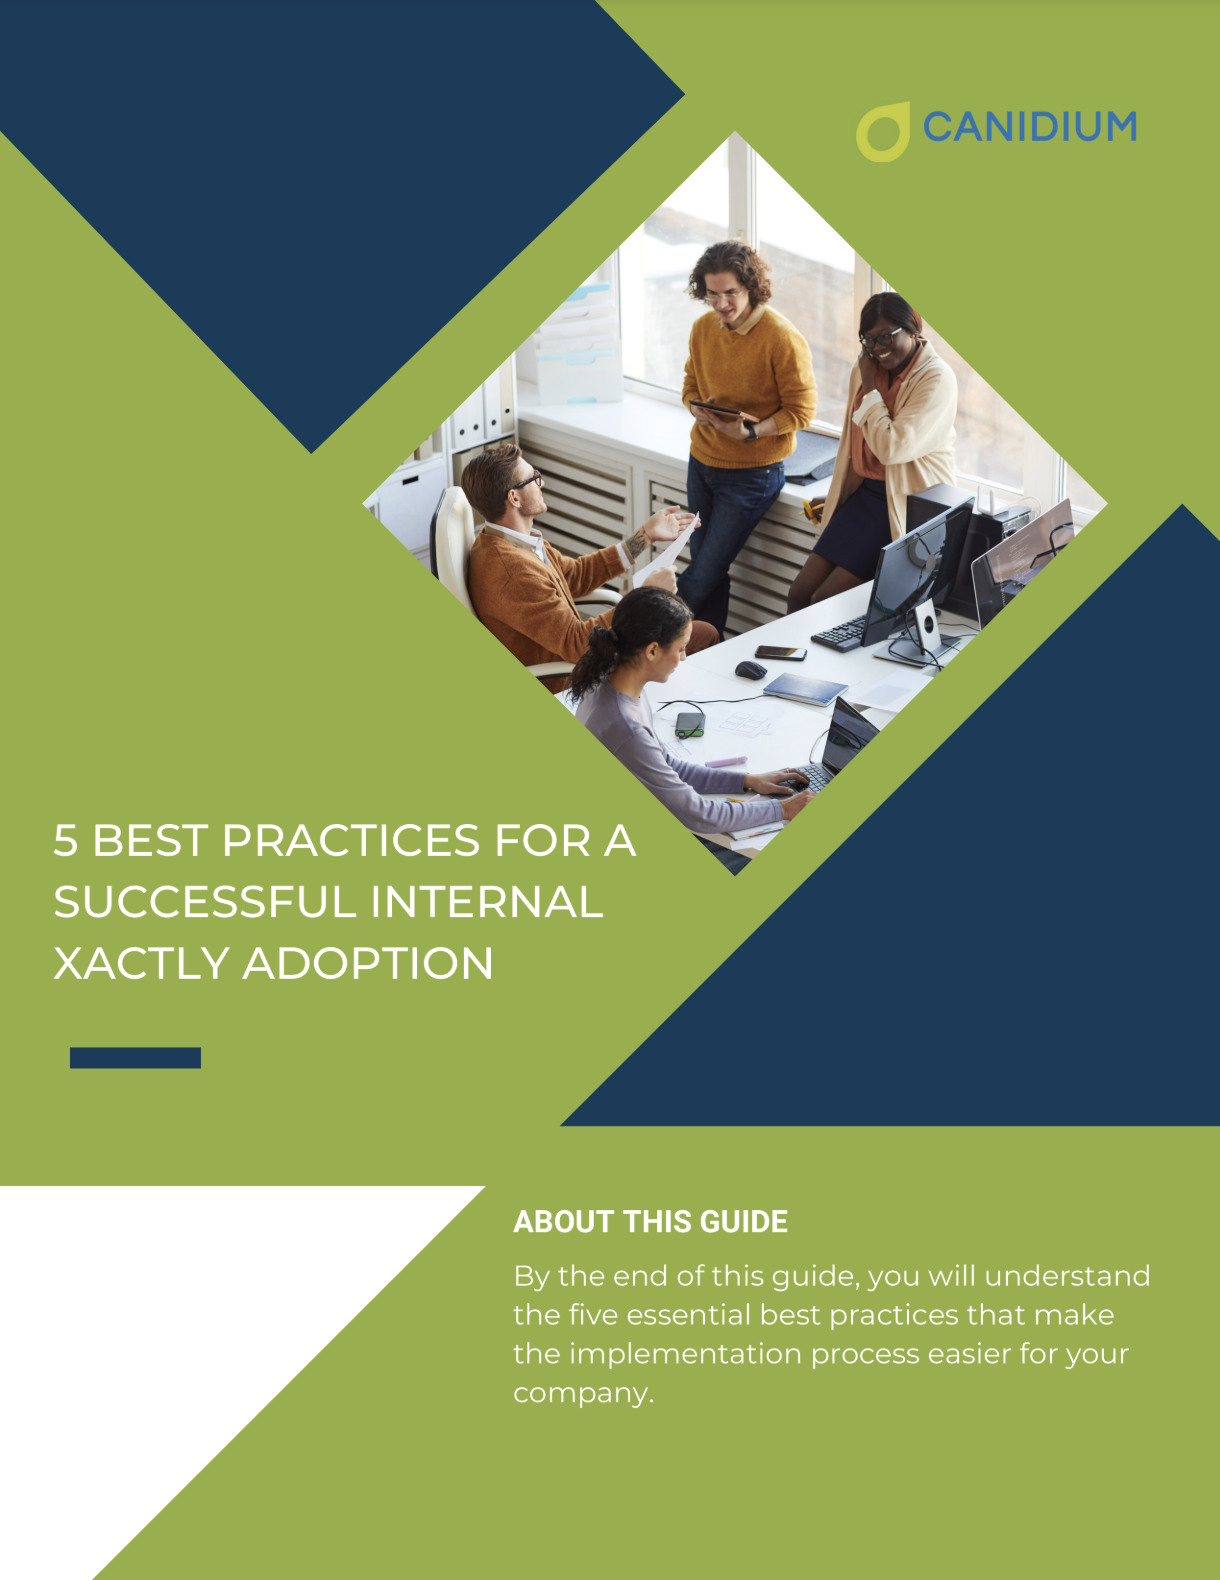 5 Best Practices for Internal Xactly Adoption